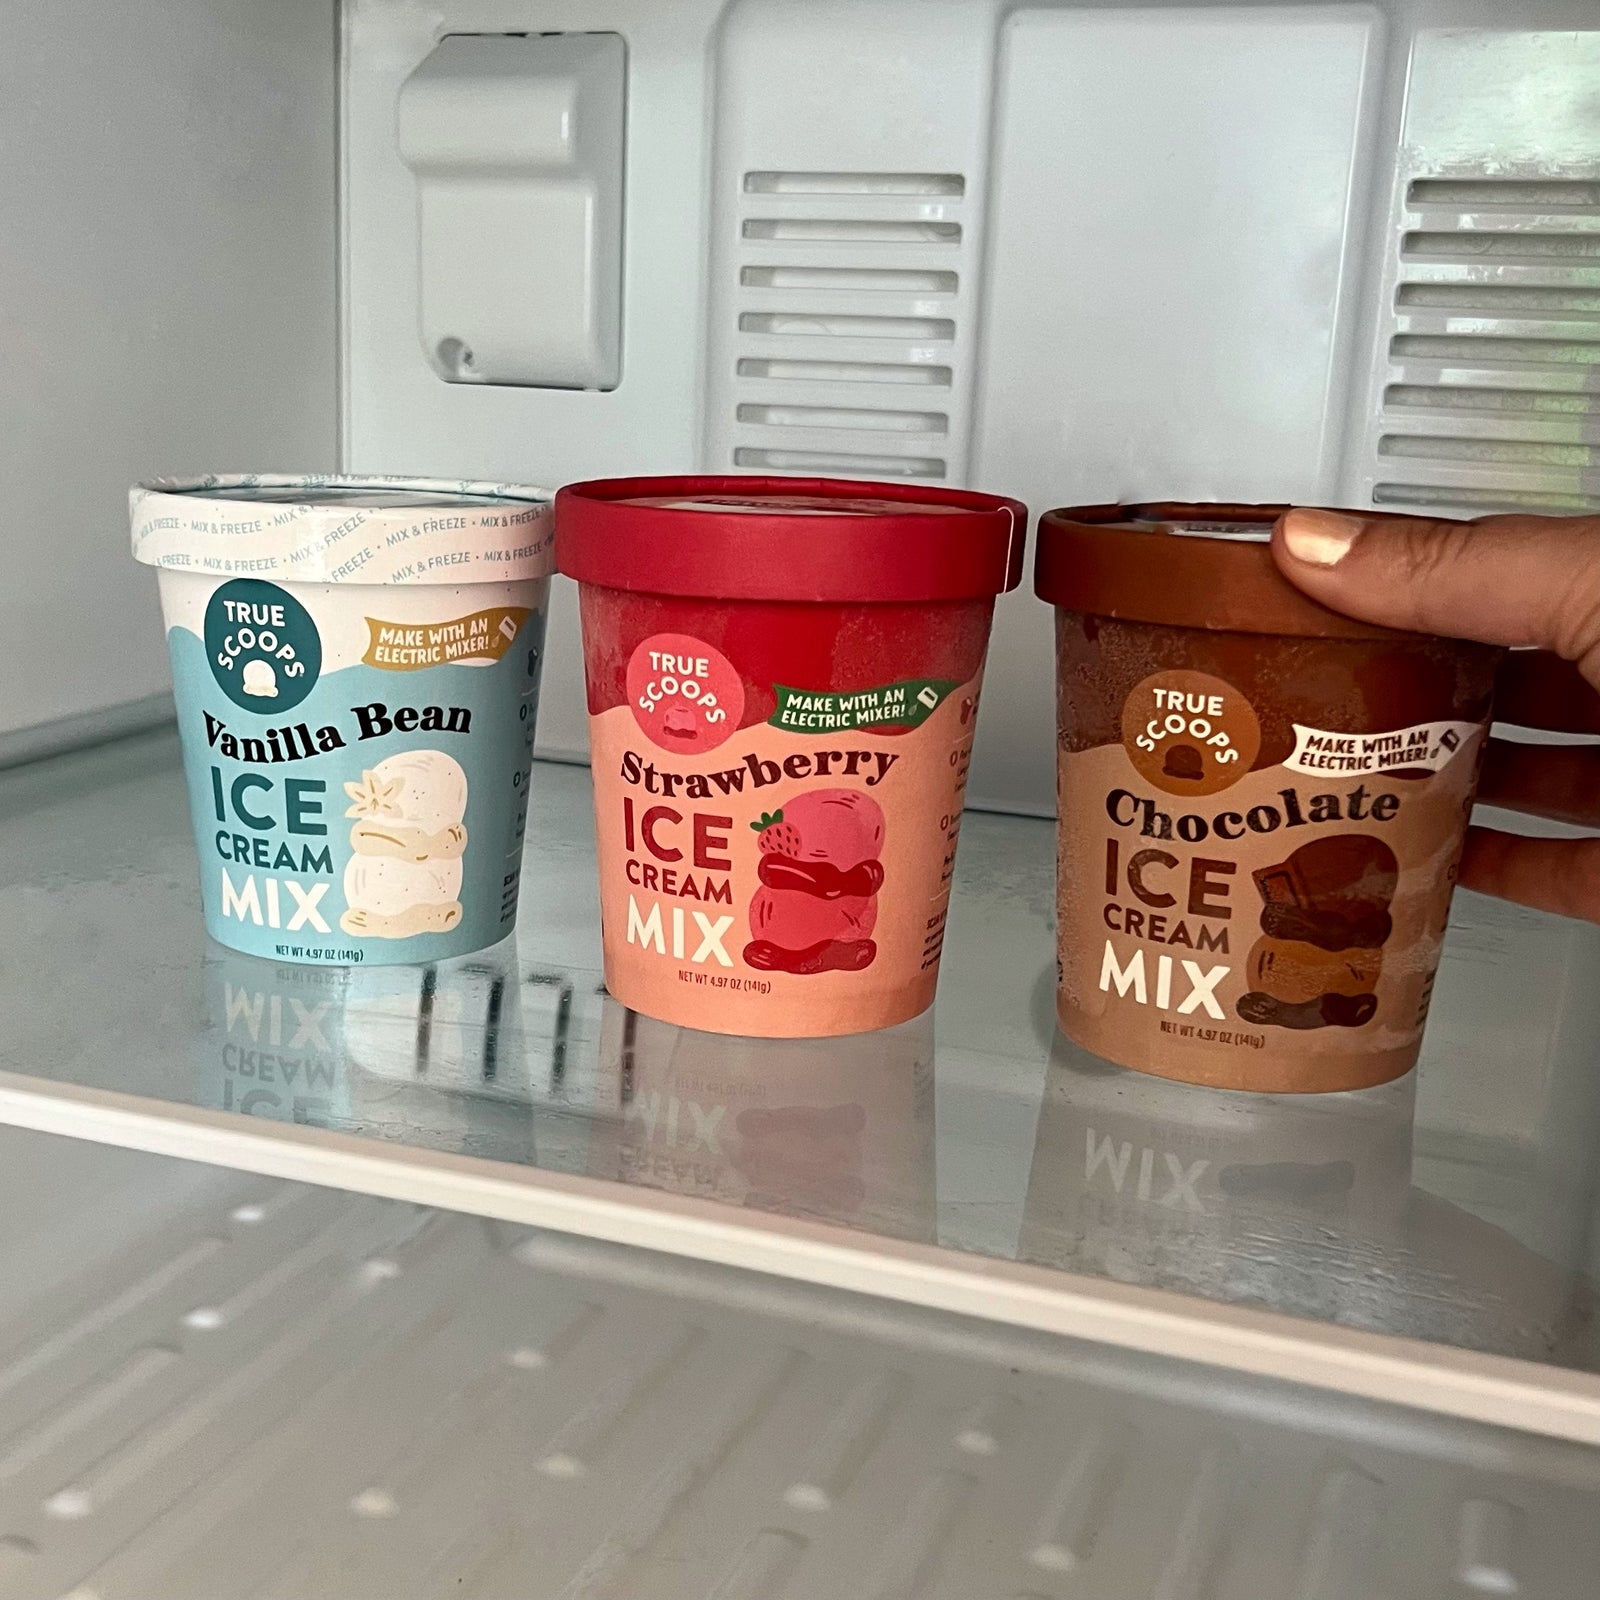 Selected Focused on Ice Cream in a Plastic Container and Displayed